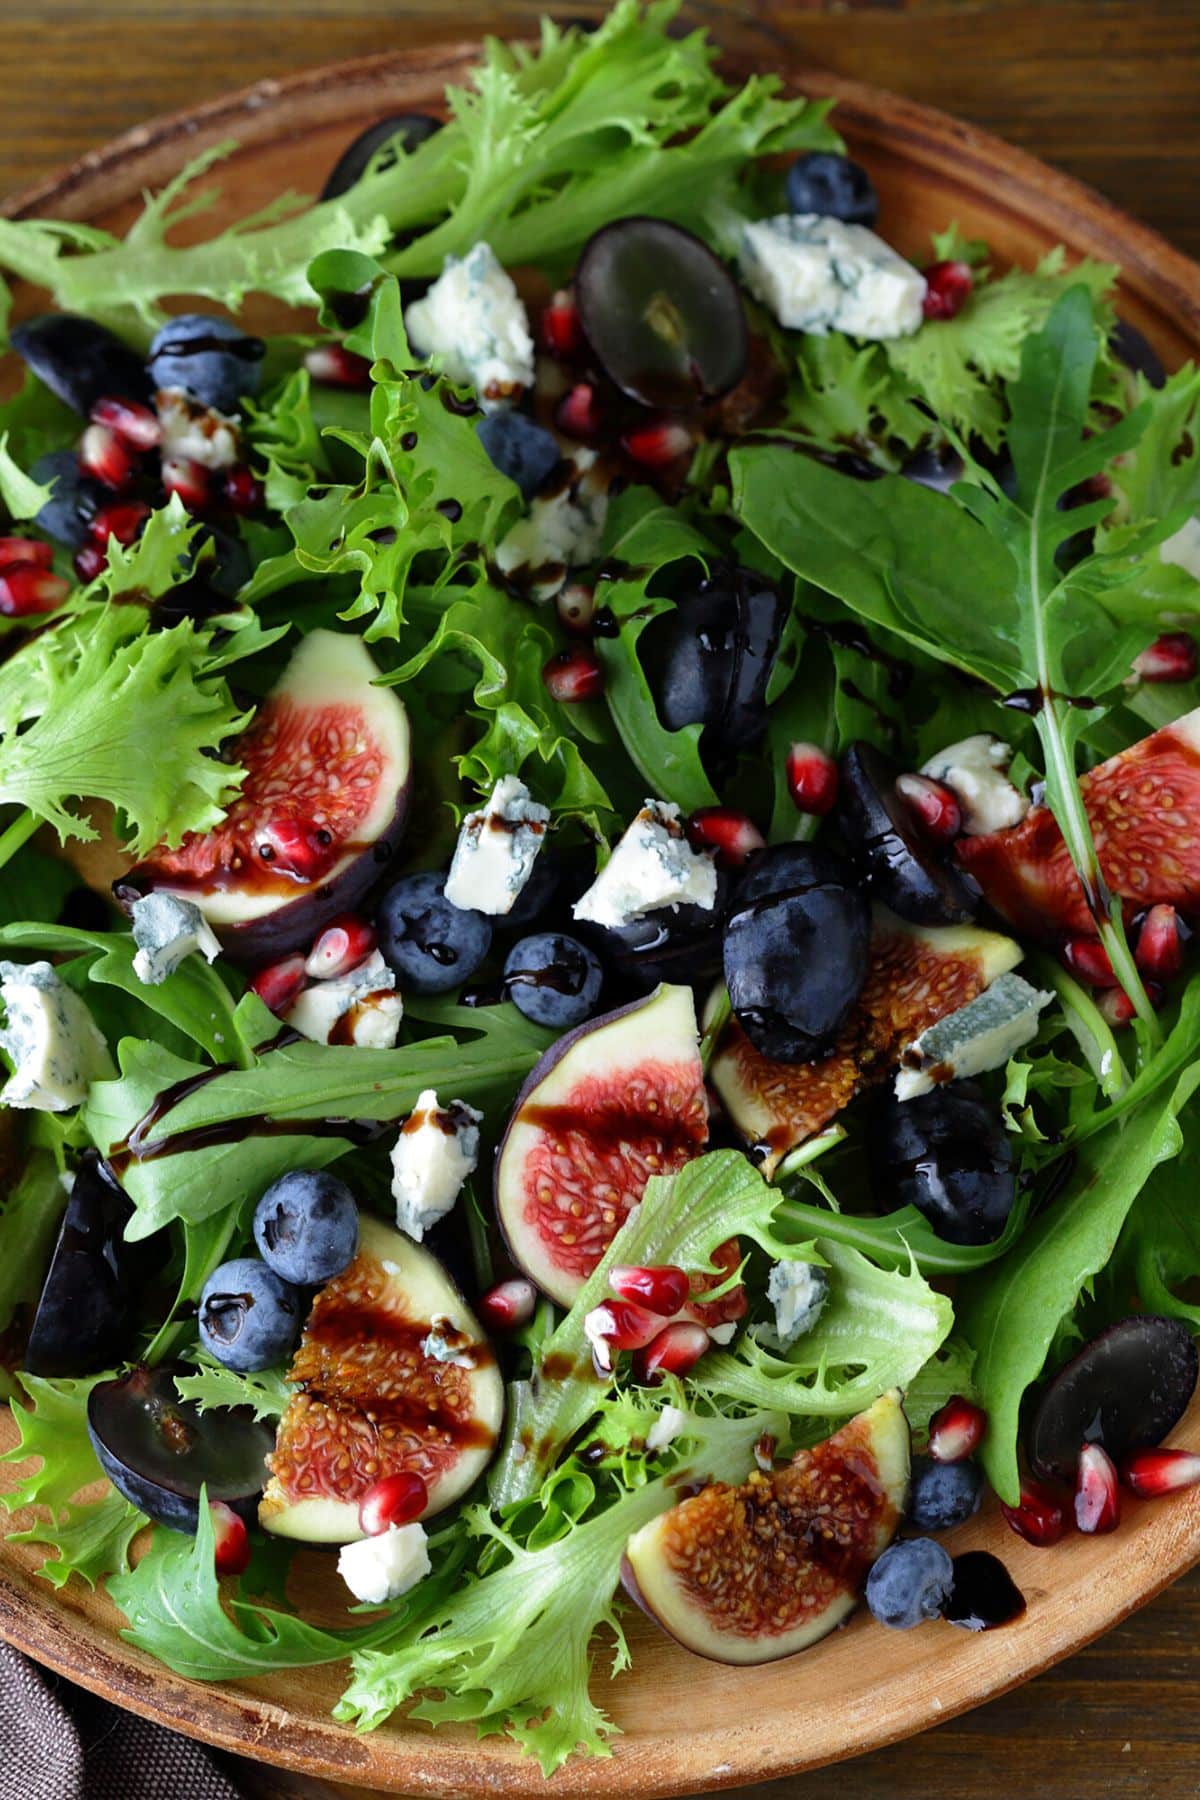 A leafy green salad with figs and blueberries and a balsamic drizzle.